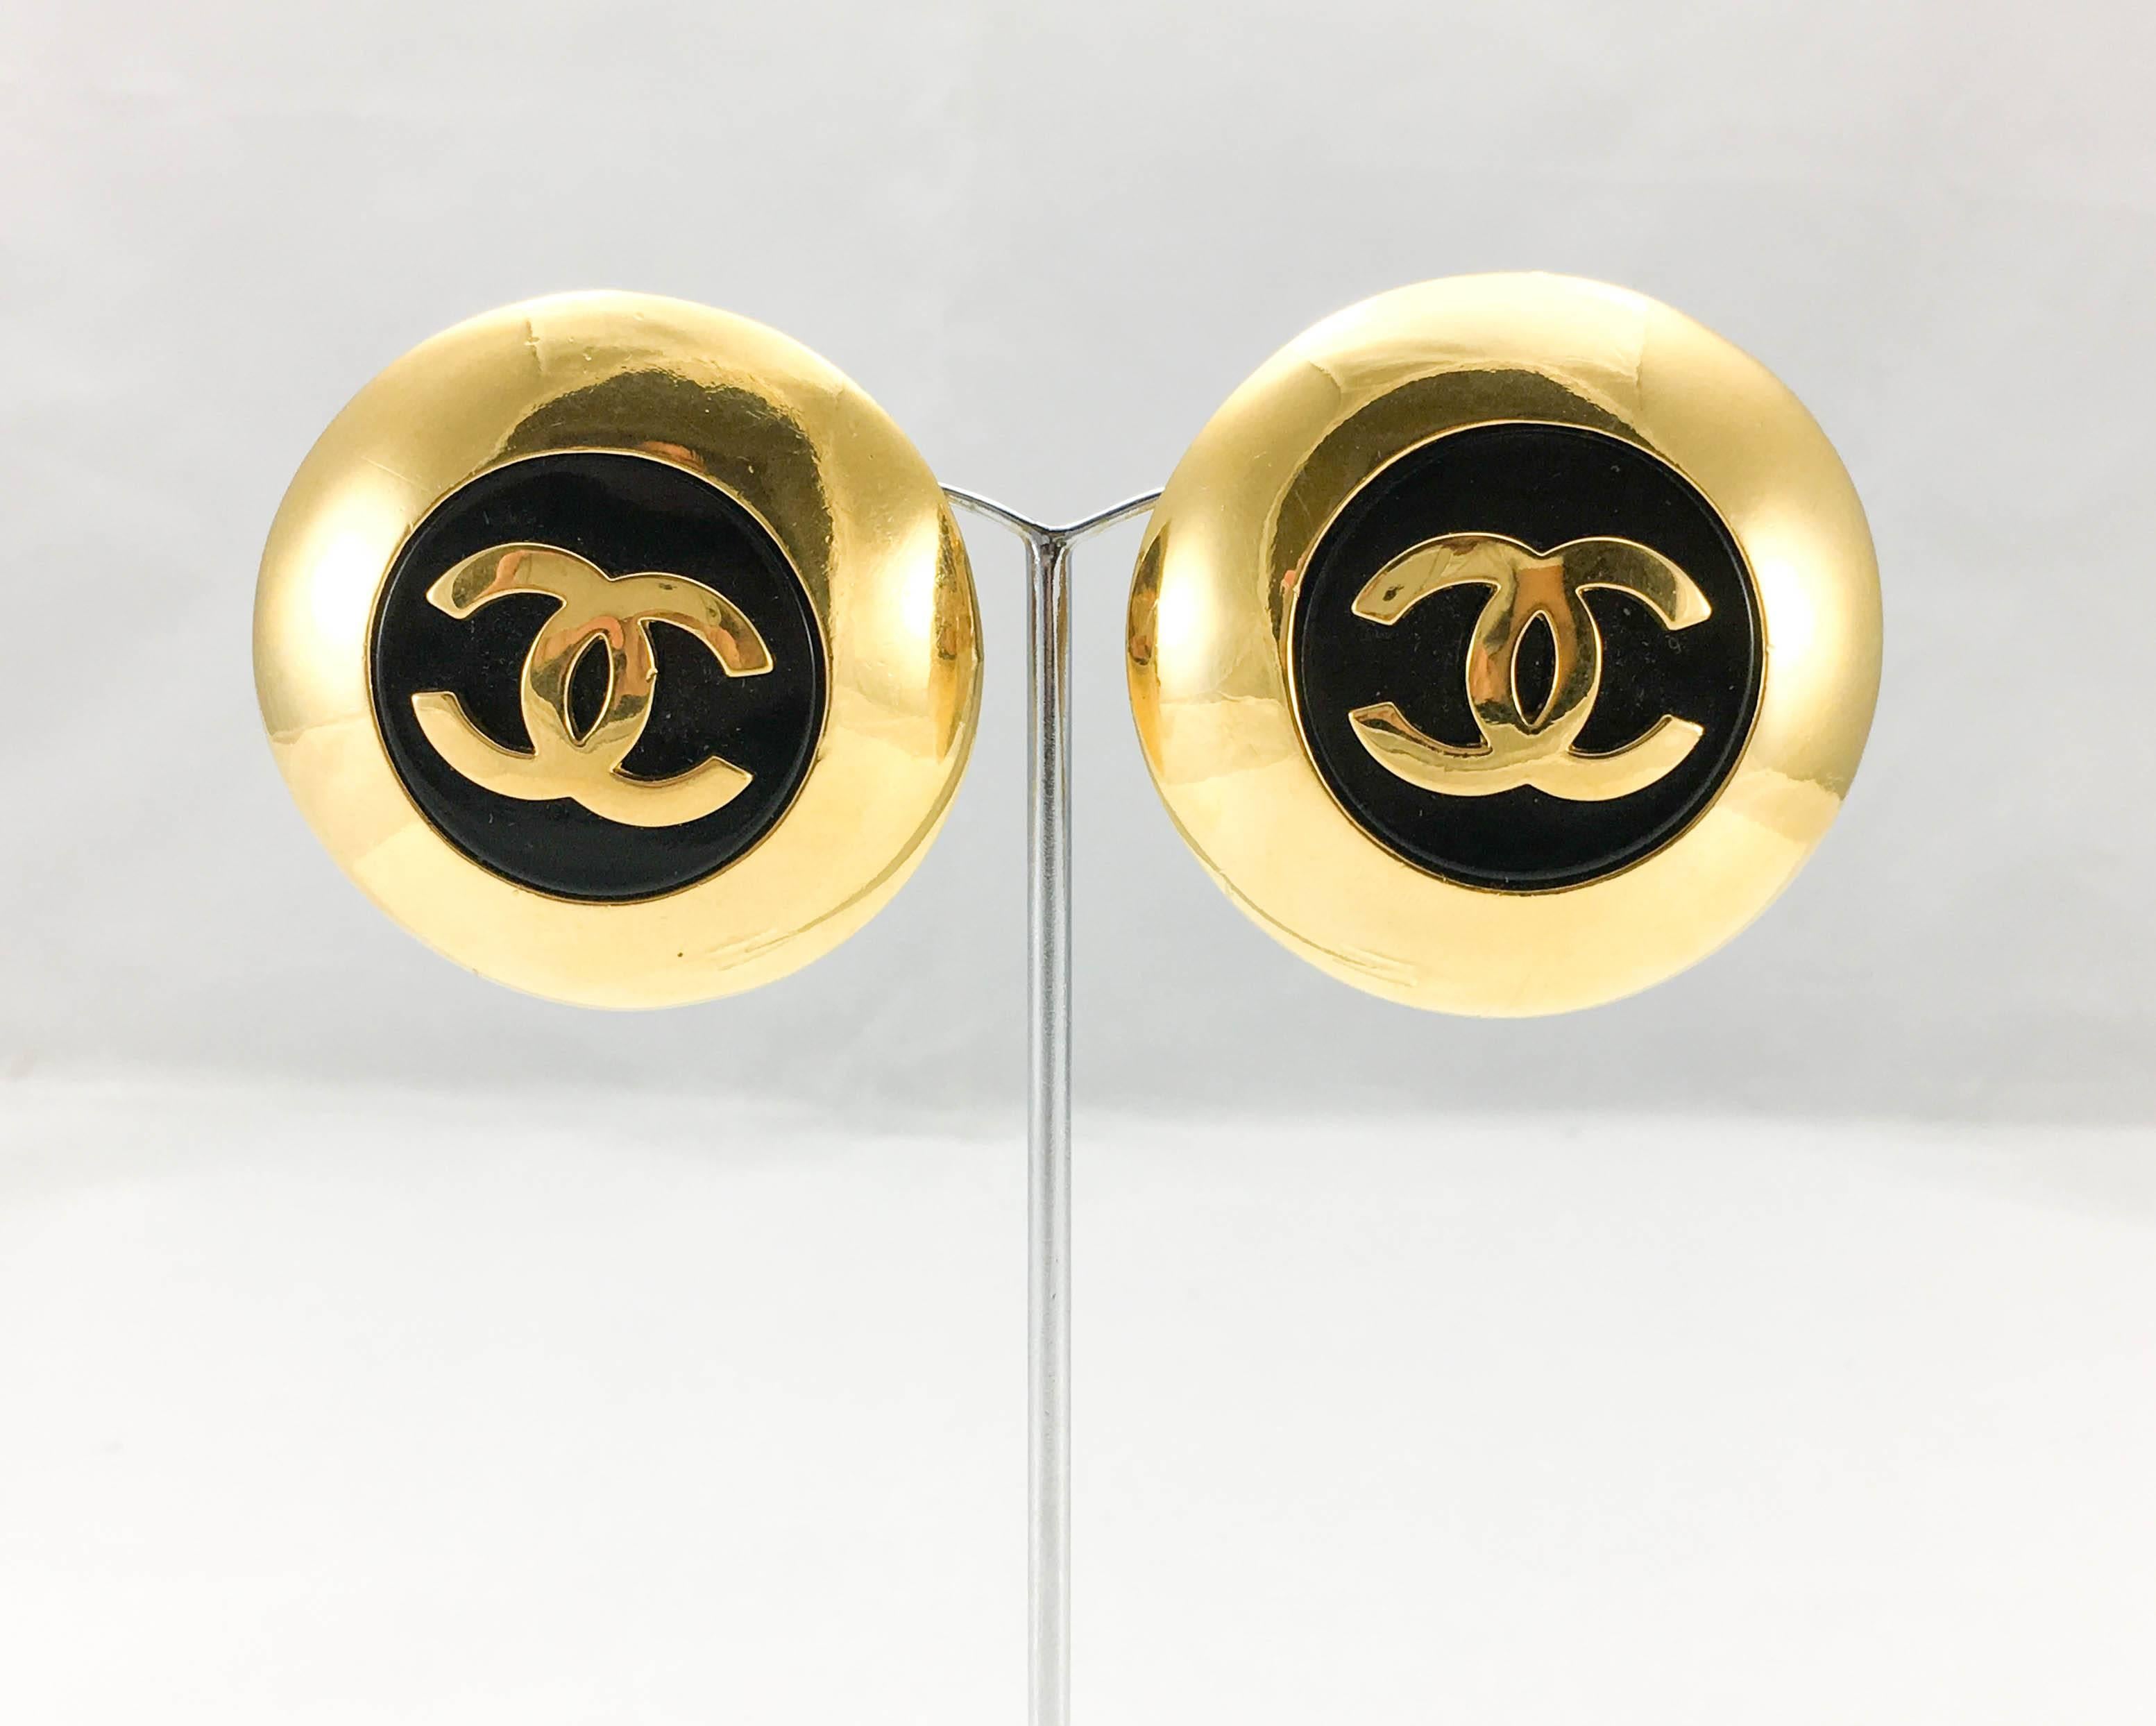 1989 Chanel Large Gold-Plated and Black Resin Round Logo Earrings In Excellent Condition In London, Chelsea